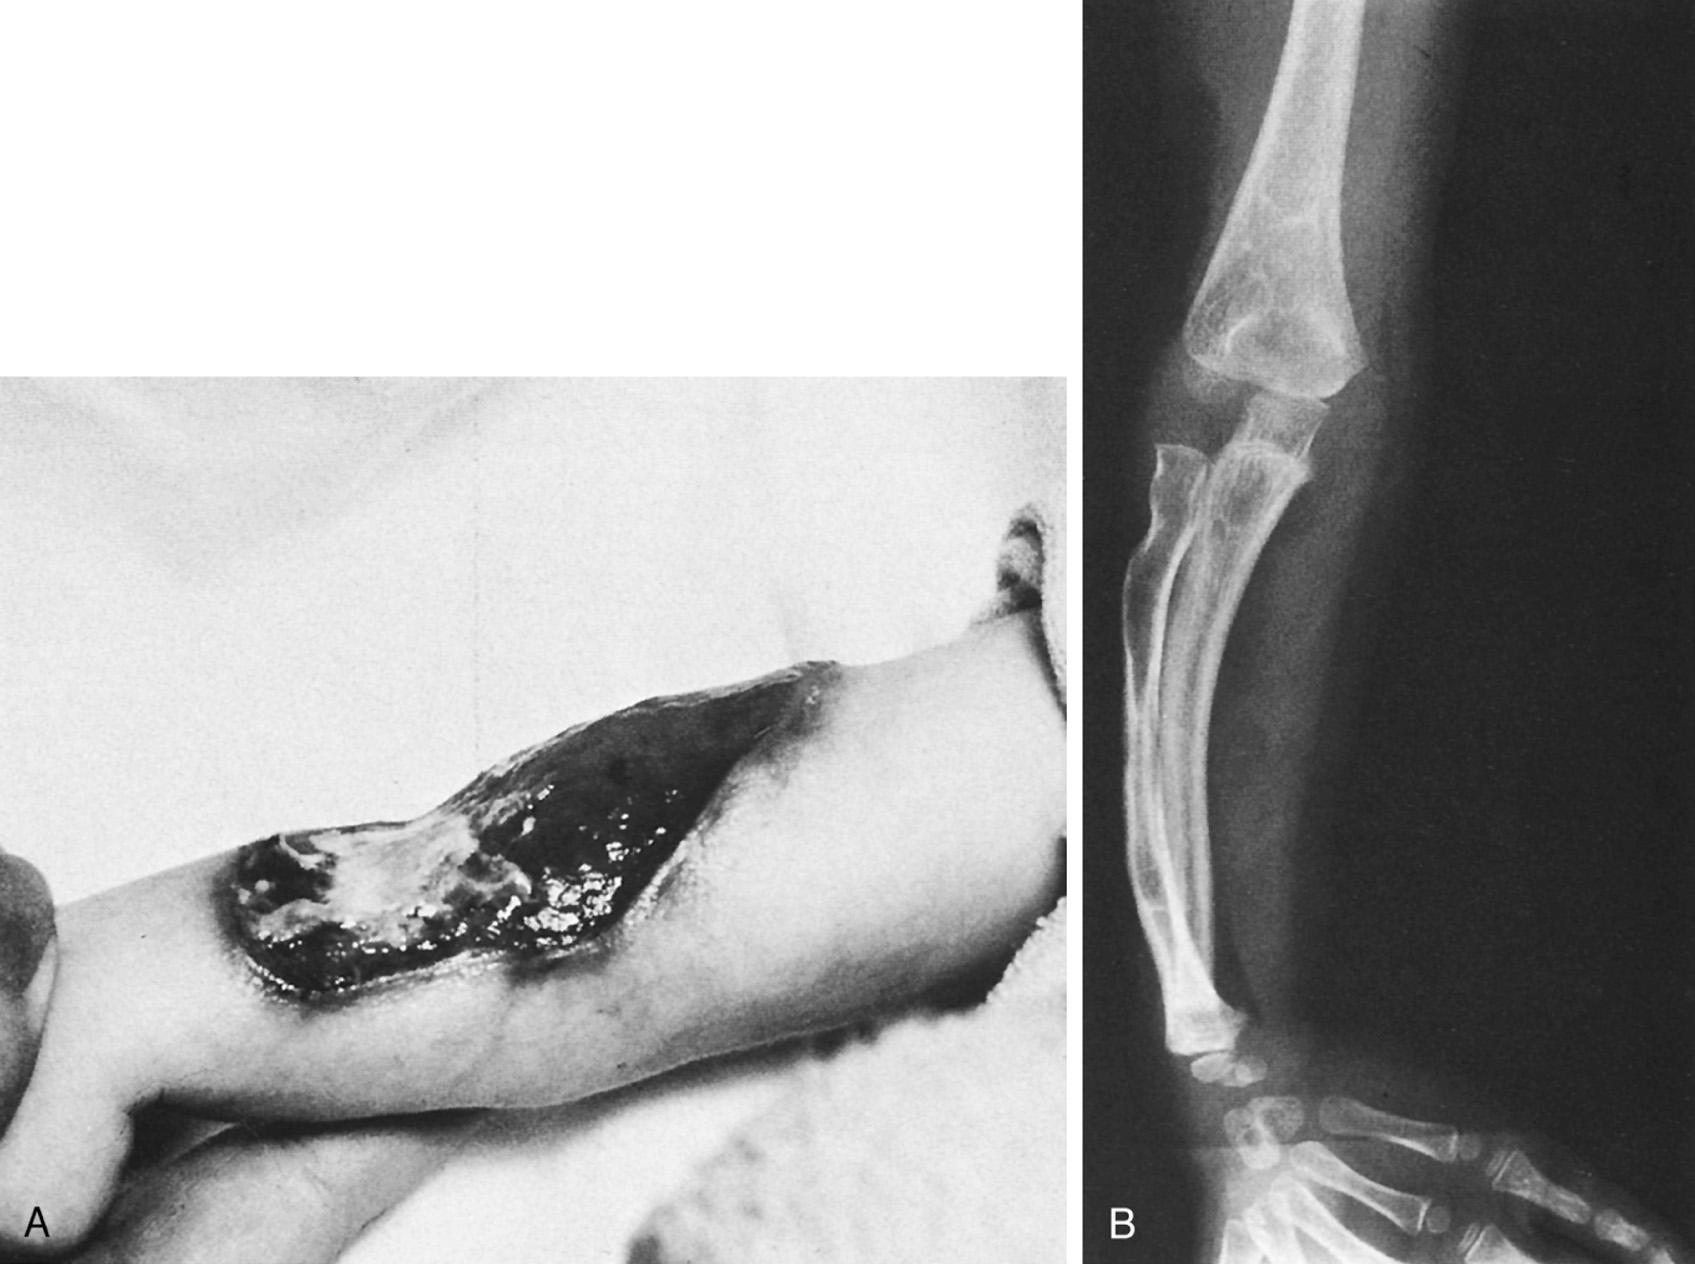 FIG 26.5, (A) Congenital aplasia of skin and soft tissues at the elbow and proximal forearm results in developmental bone changes (B) in the forearm and elbow.